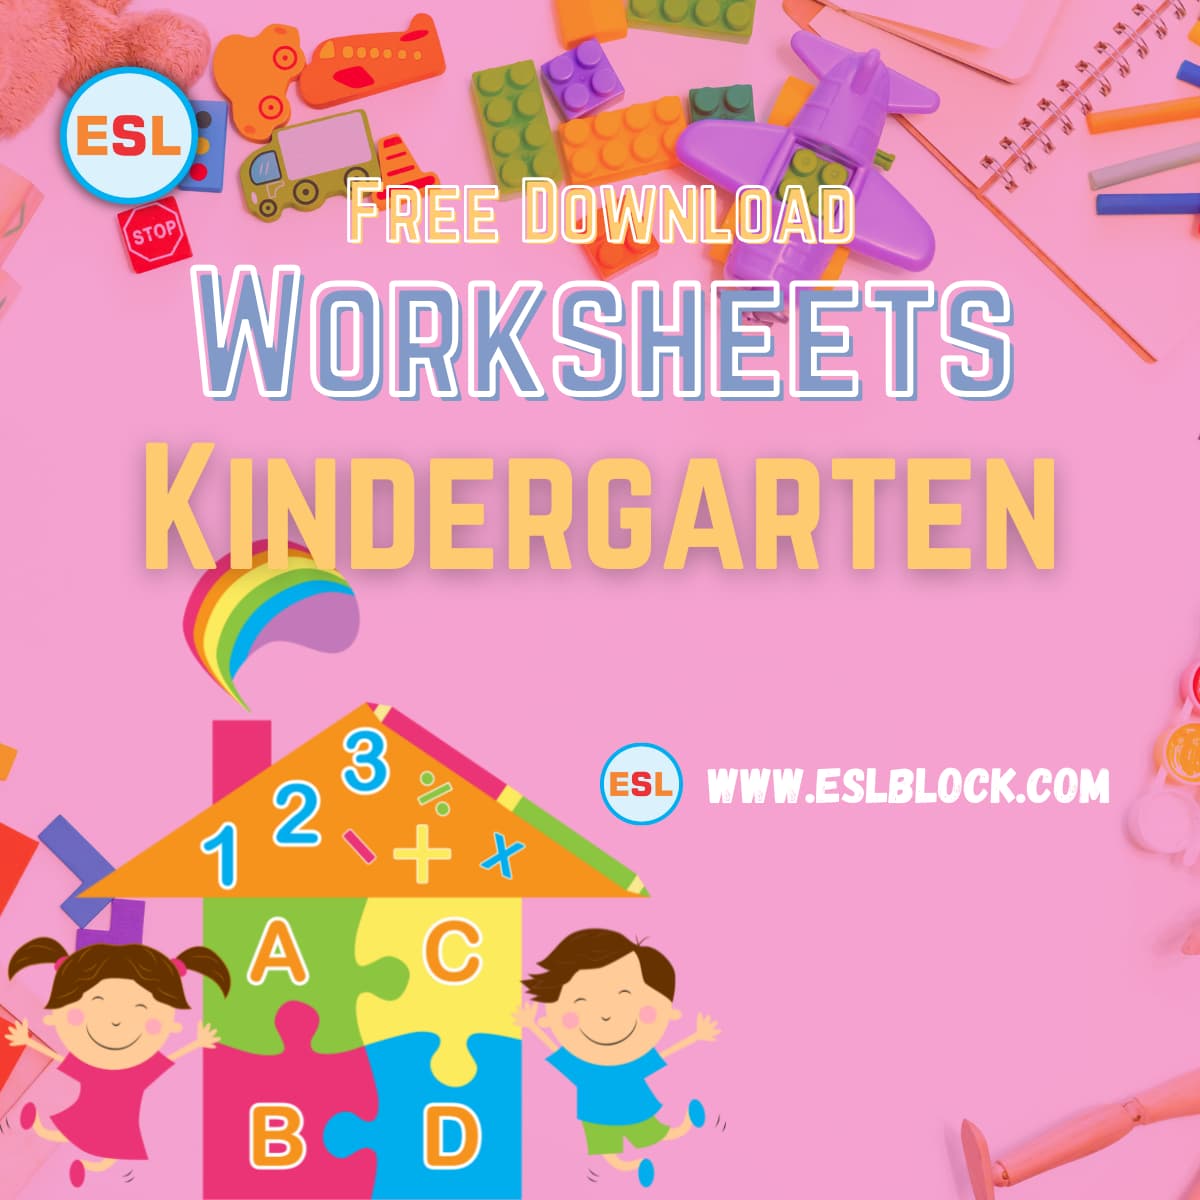 Kindergarten Worksheets: Kindergarten is an important time for children as they are just starting their journey of learning and developing basic skills that they will use throughout their academic career